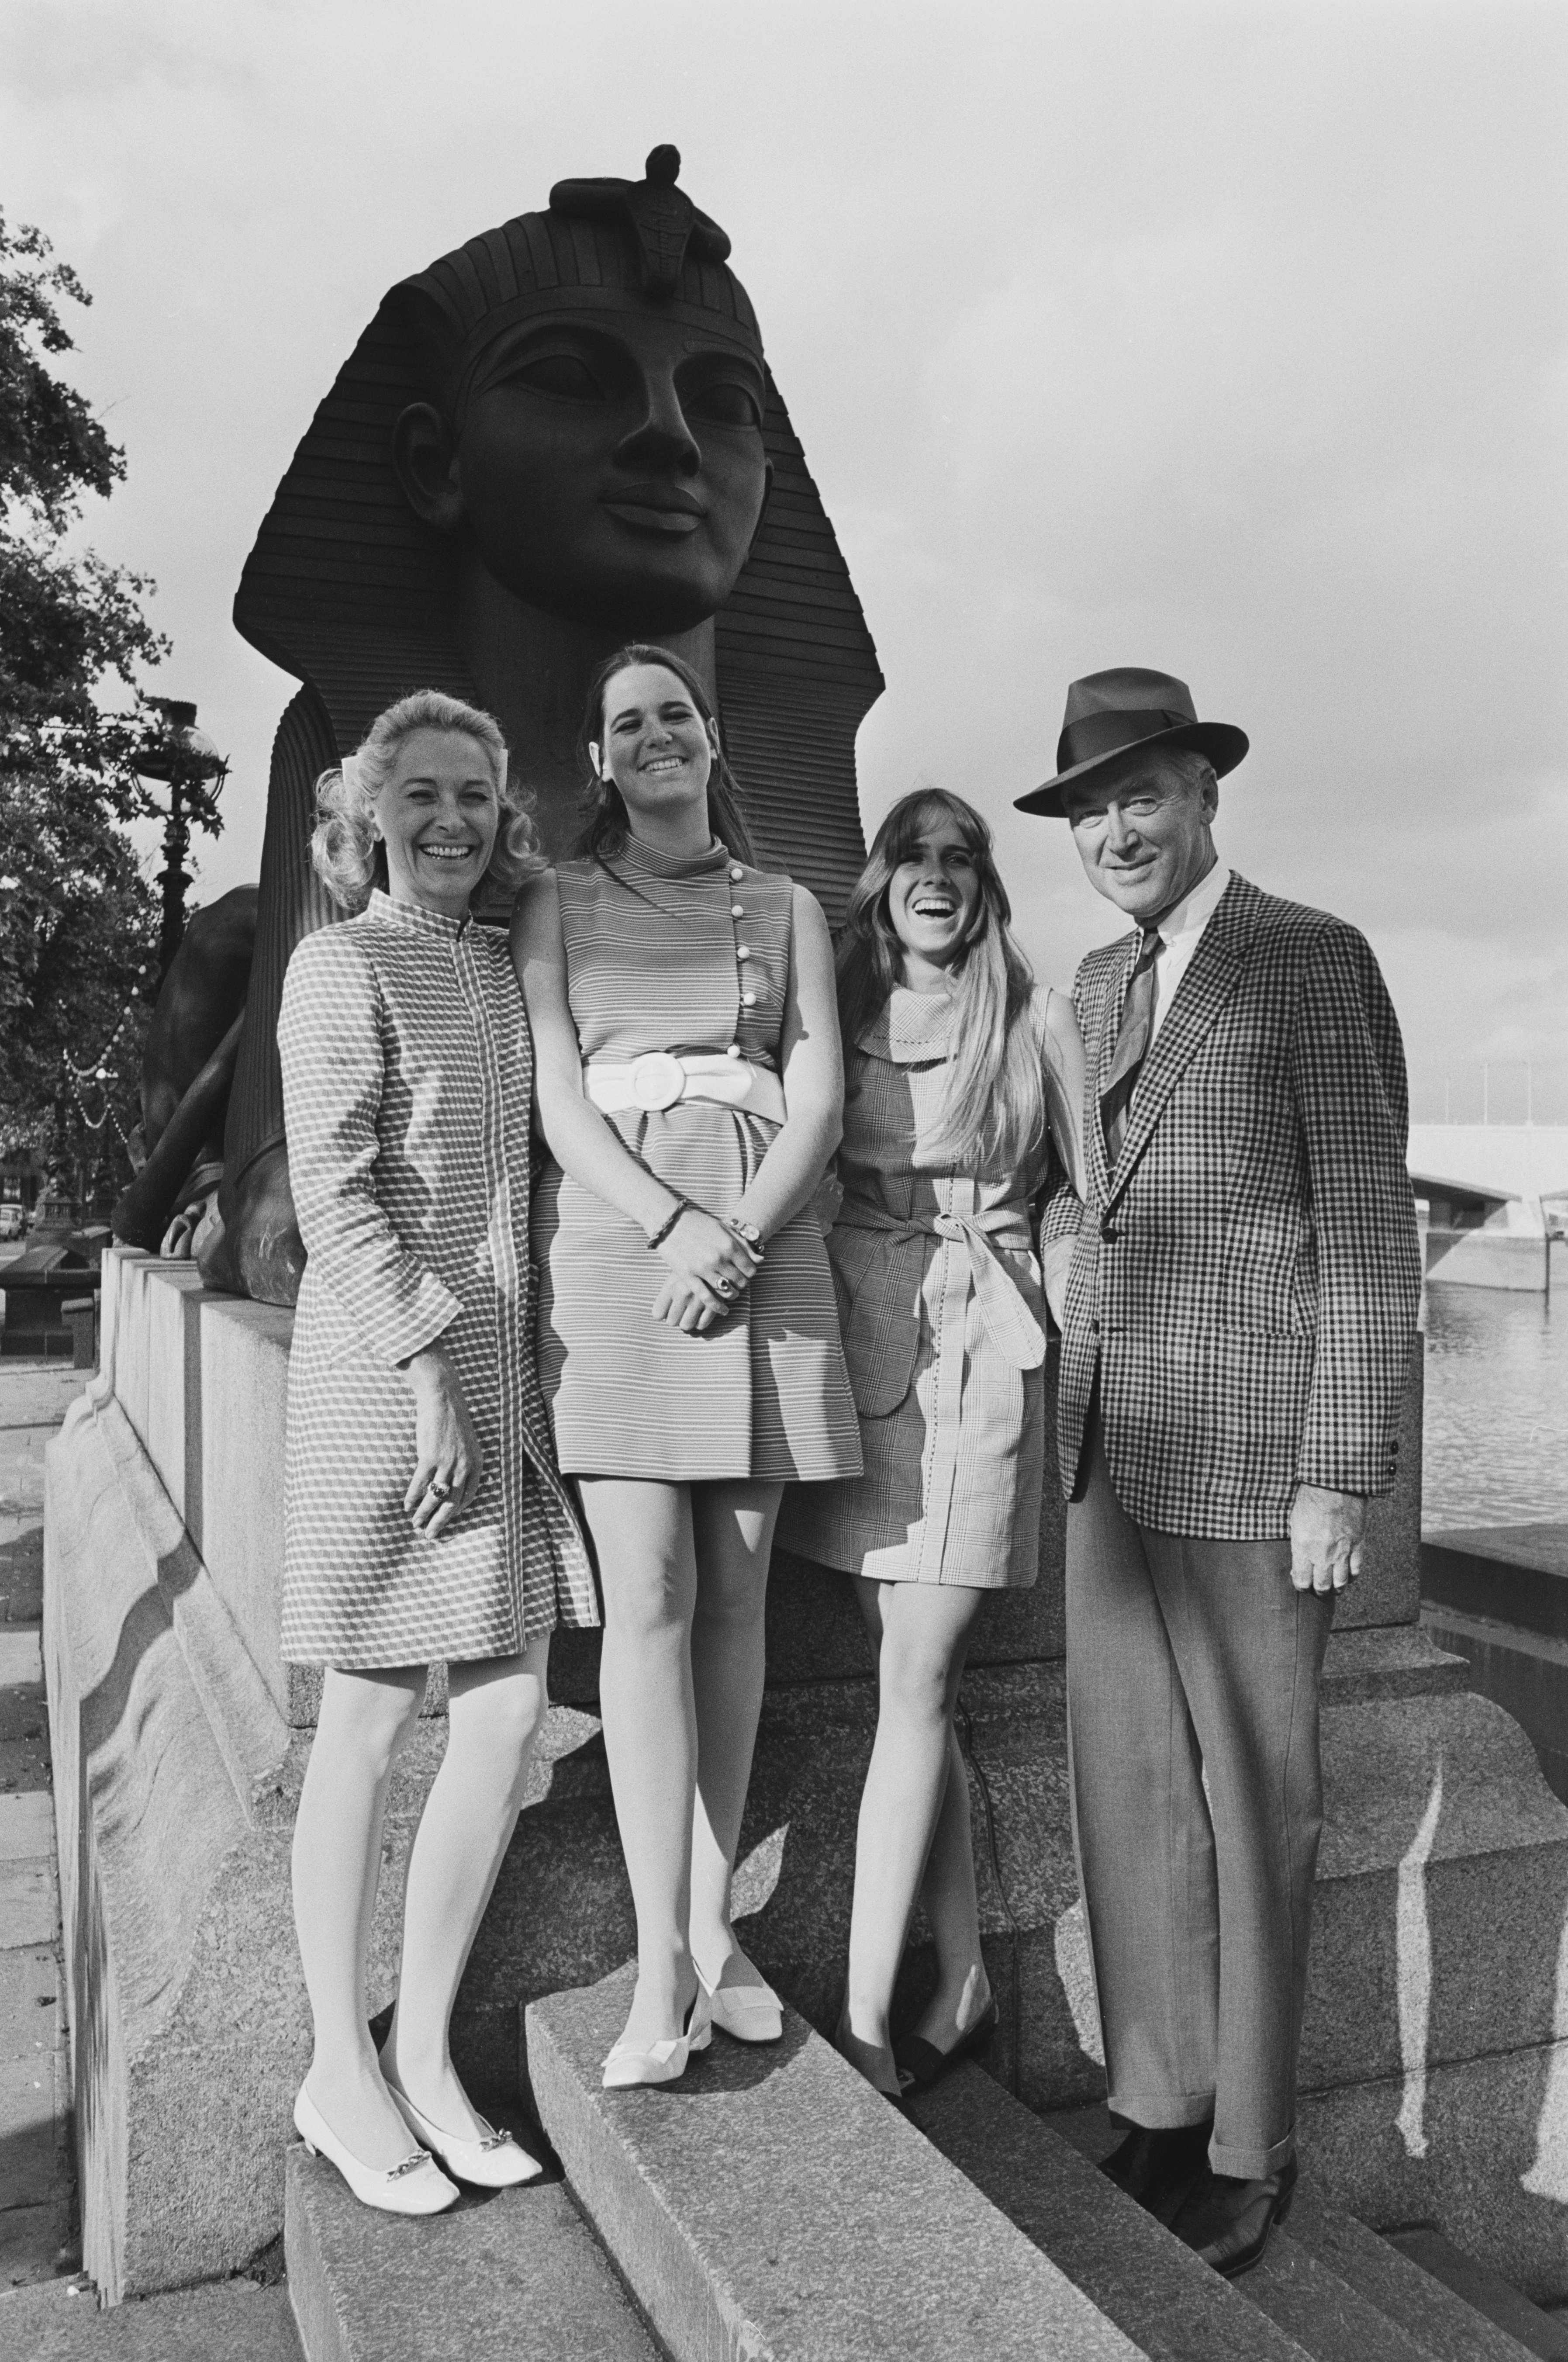 James Stewart, Gloria Hatrick McLean, and their daughters Judy and Kelly, sightseeing in London, on June 24, 1968. | Source: Getty Images